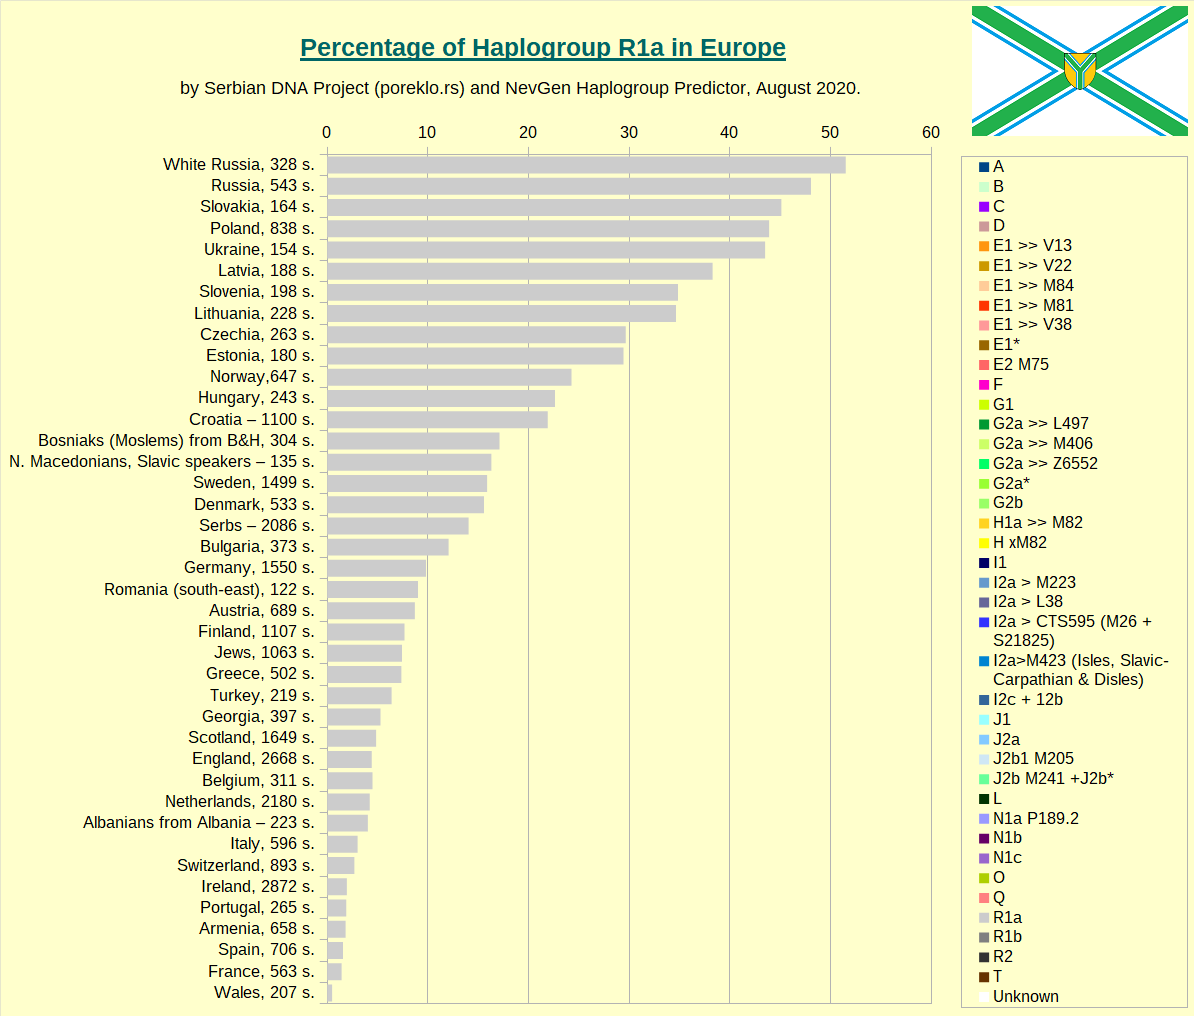 Percentage of Haplogroup R1a by country or people in Europe